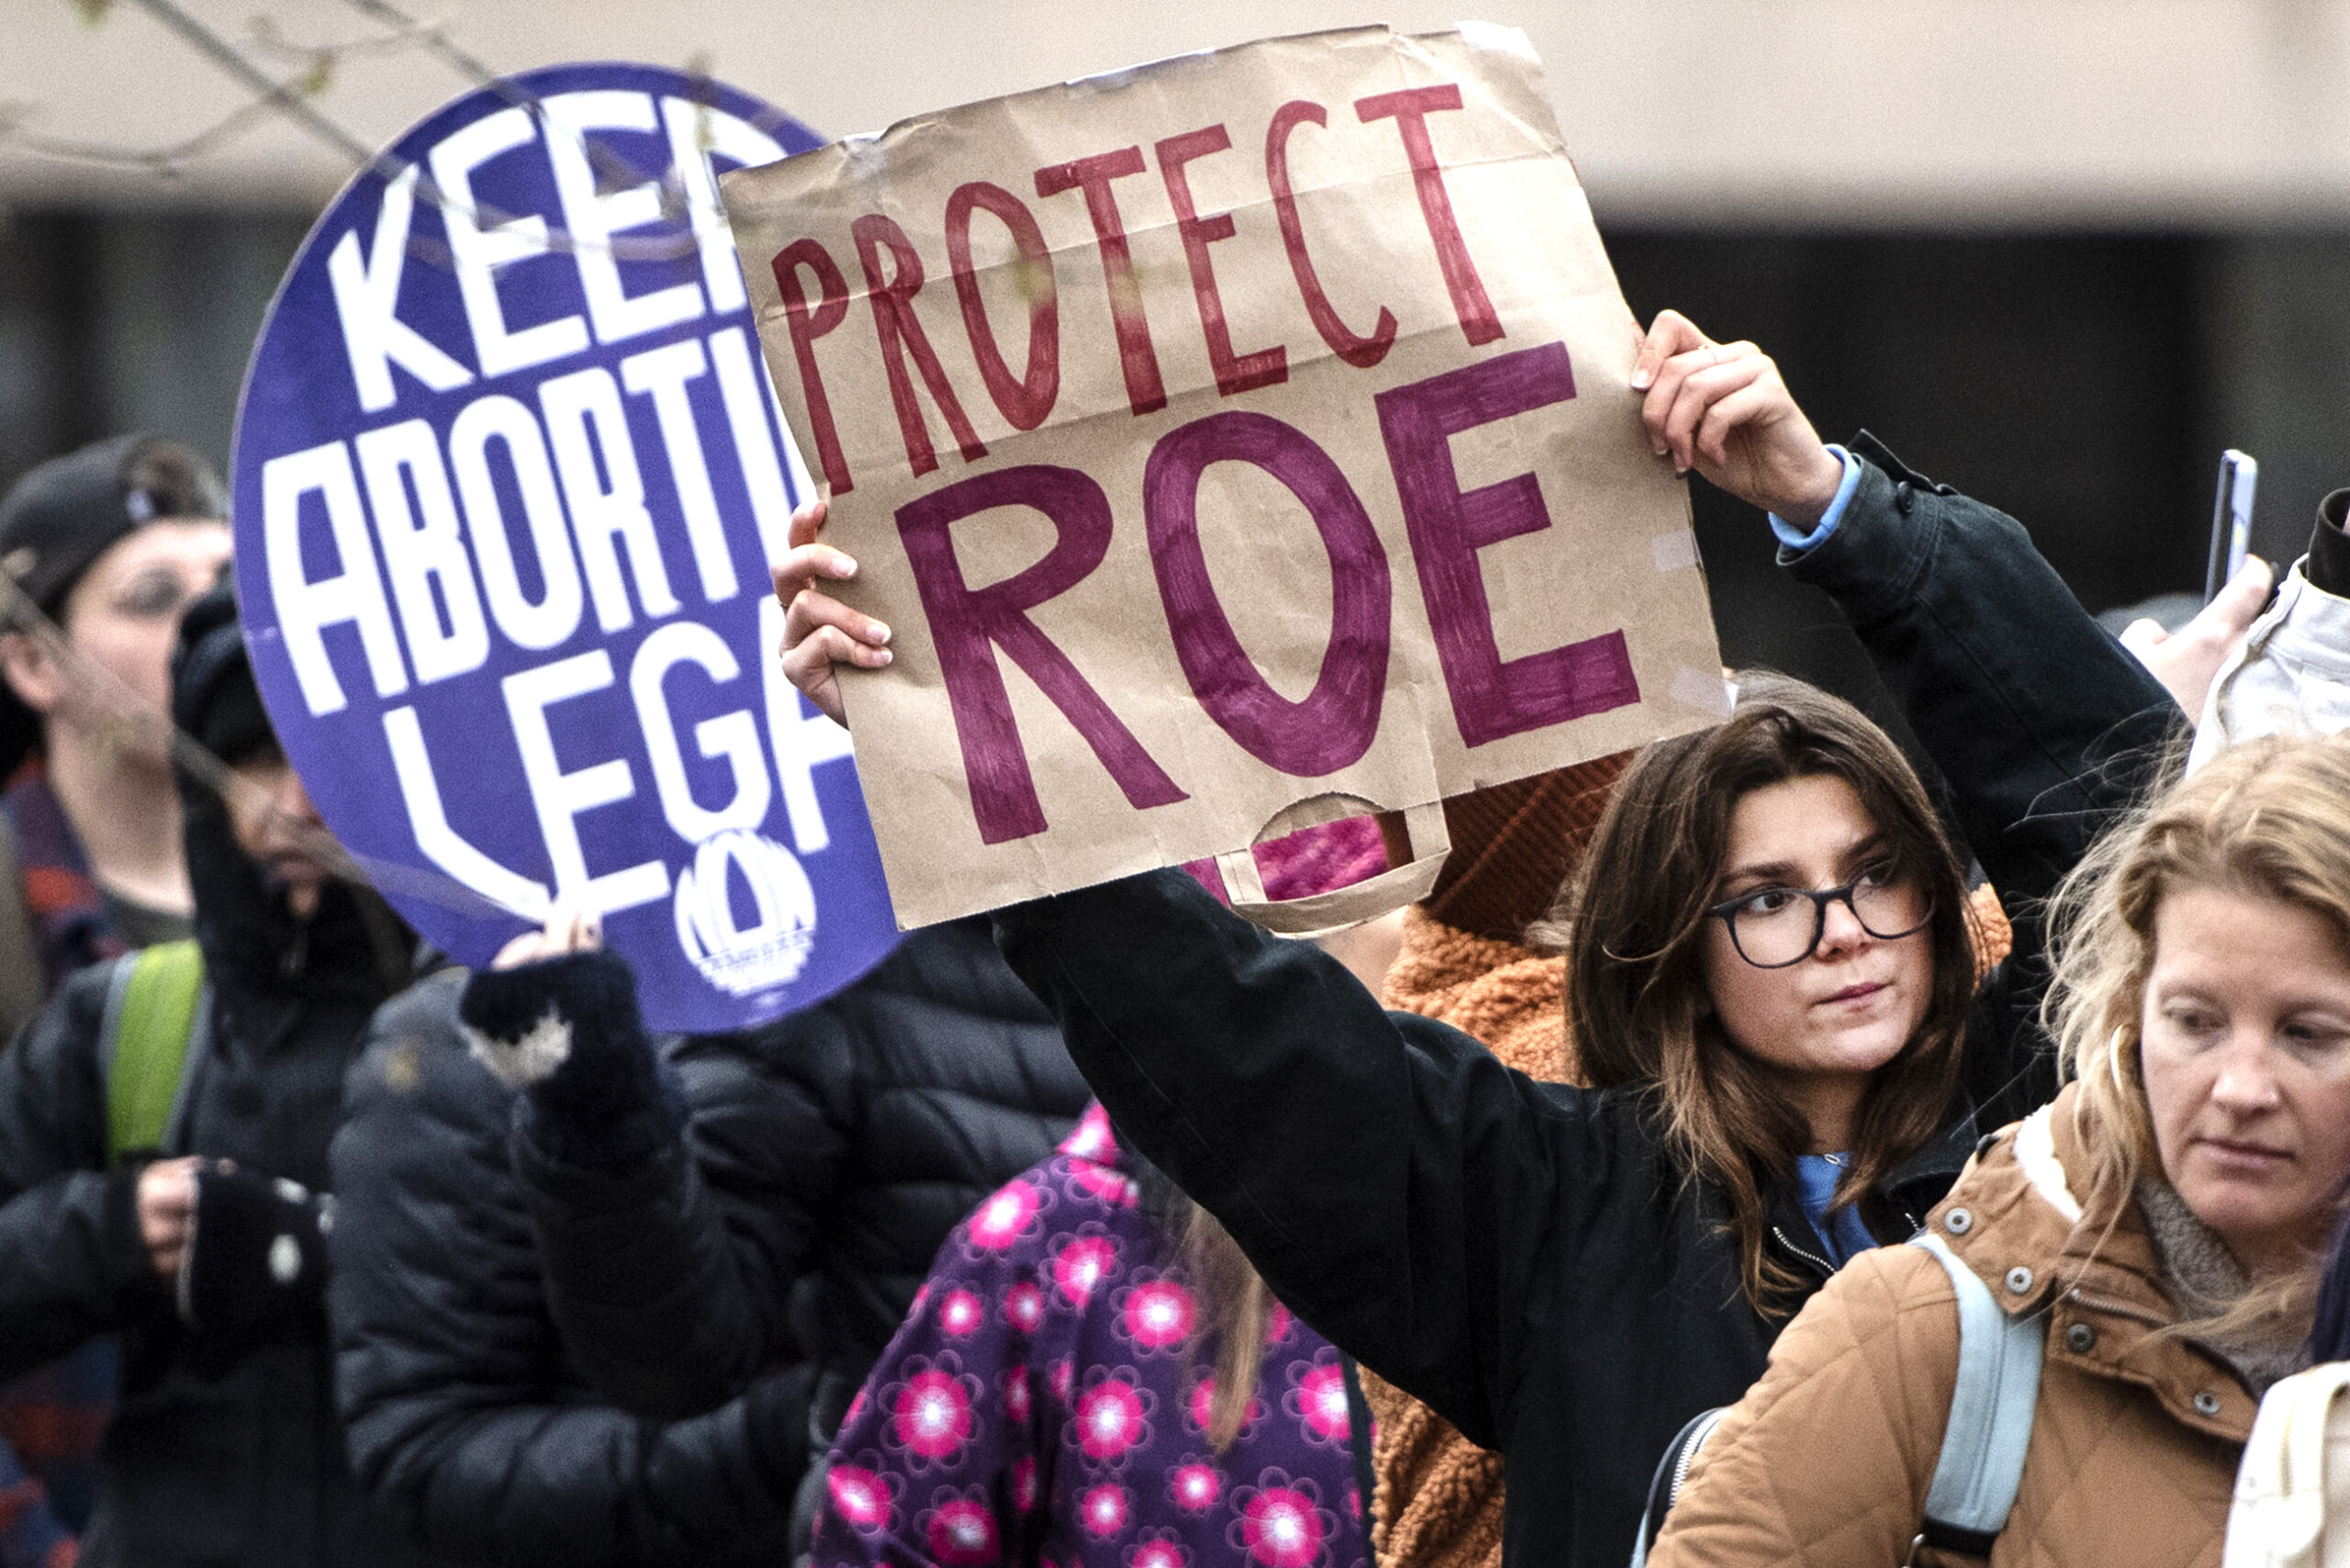 Protester's signs say "Protect Roe" and "Keep Abortion Legal."